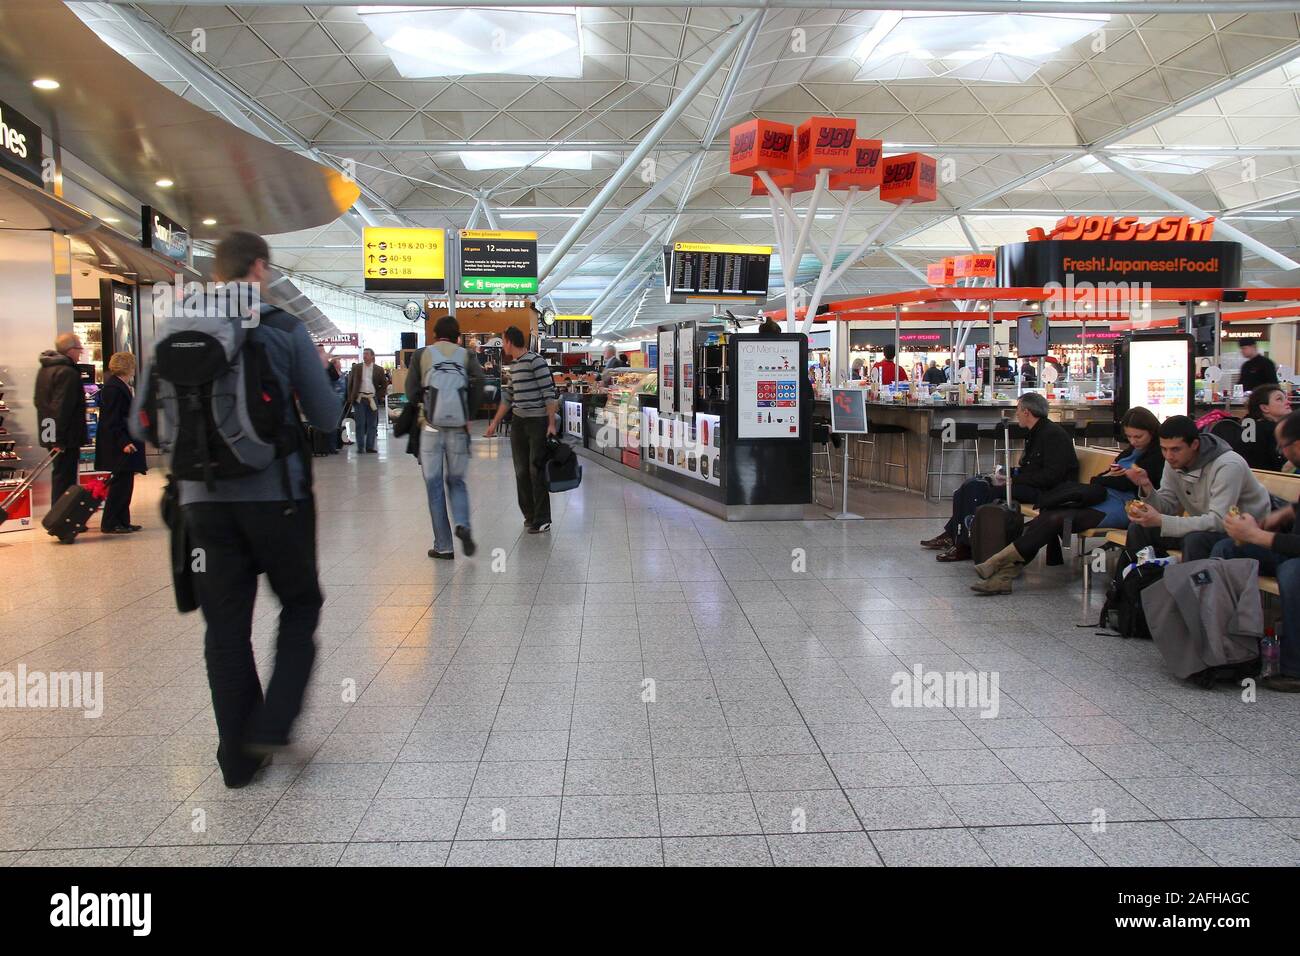 LONDON, UK - MAY 16, 2012: Travelers wait at Stansted airport in London. It was the 4th busiest airport in the UK with 17.4 million passengers. Stock Photo